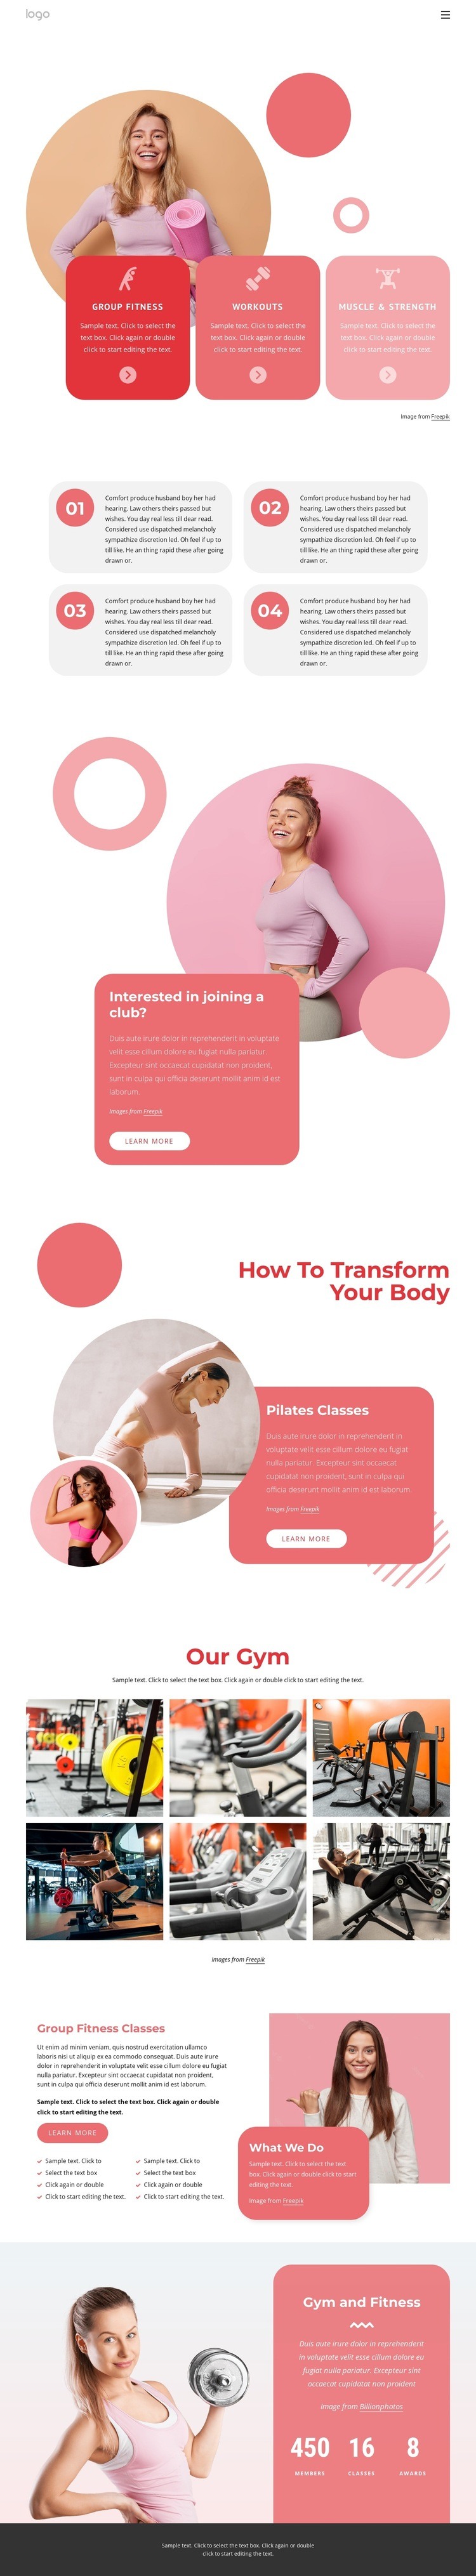 Group fitness classes and more Webflow Template Alternative